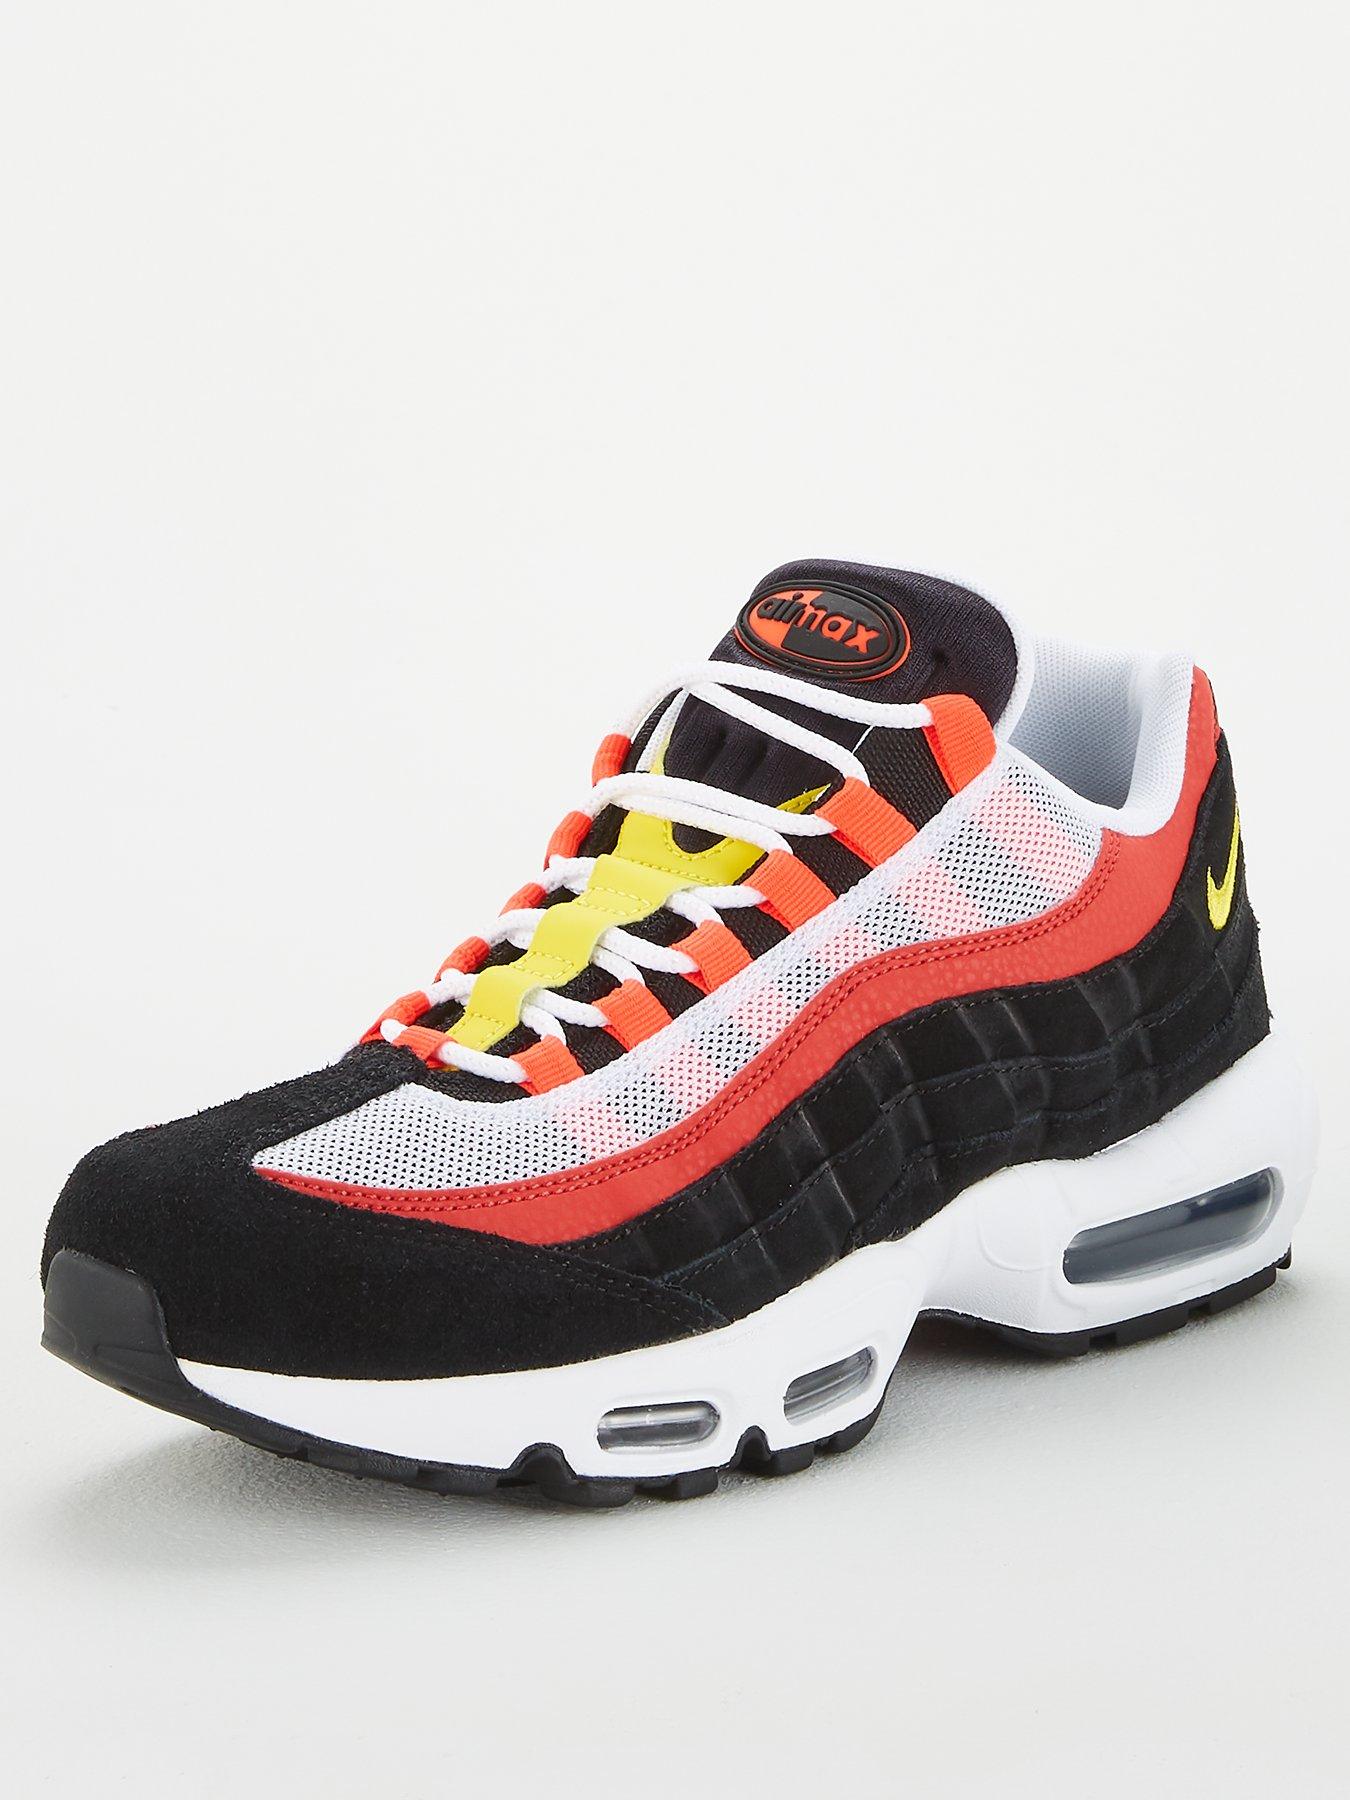 black and red air max 95s